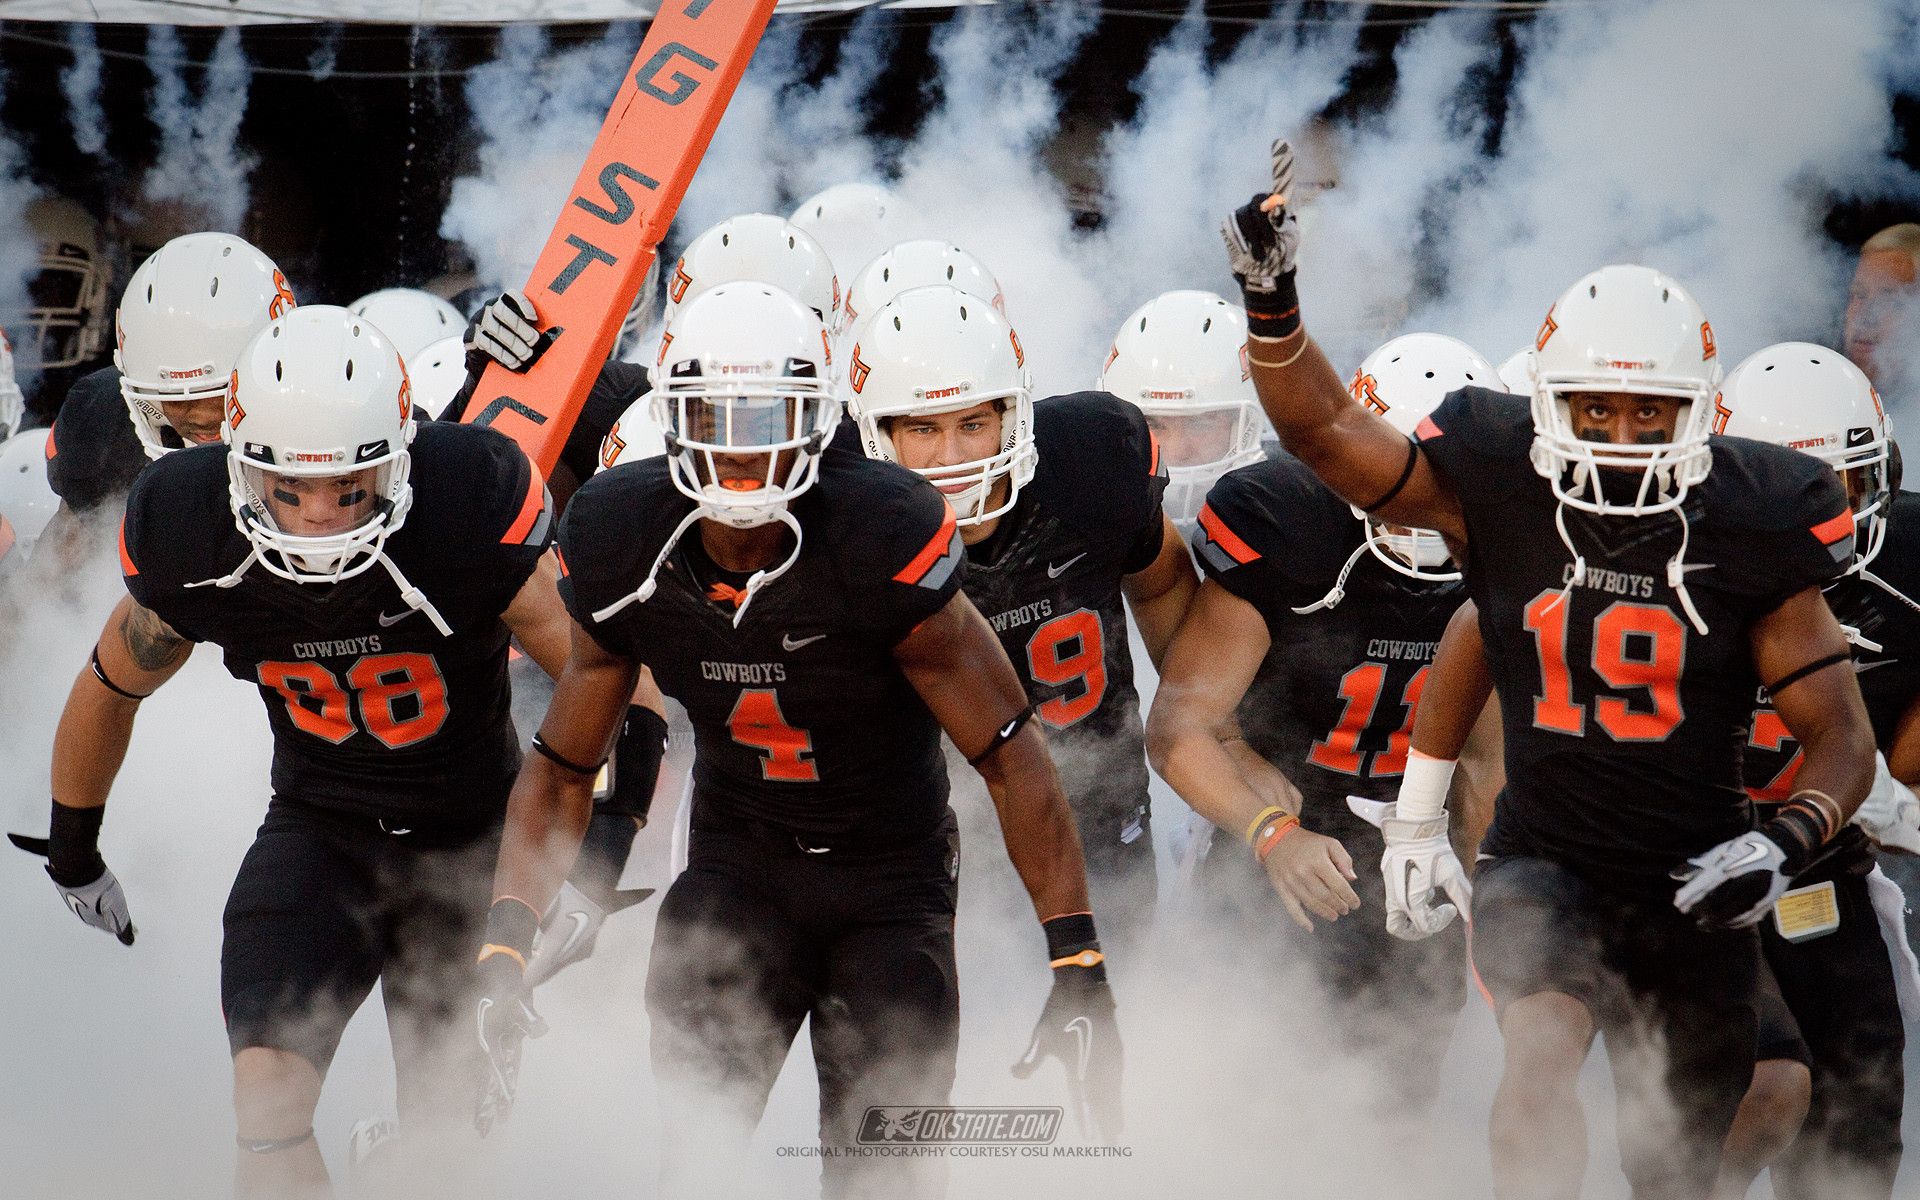 Oklahoma State University 2015 Football Schedule Wallpapers ...